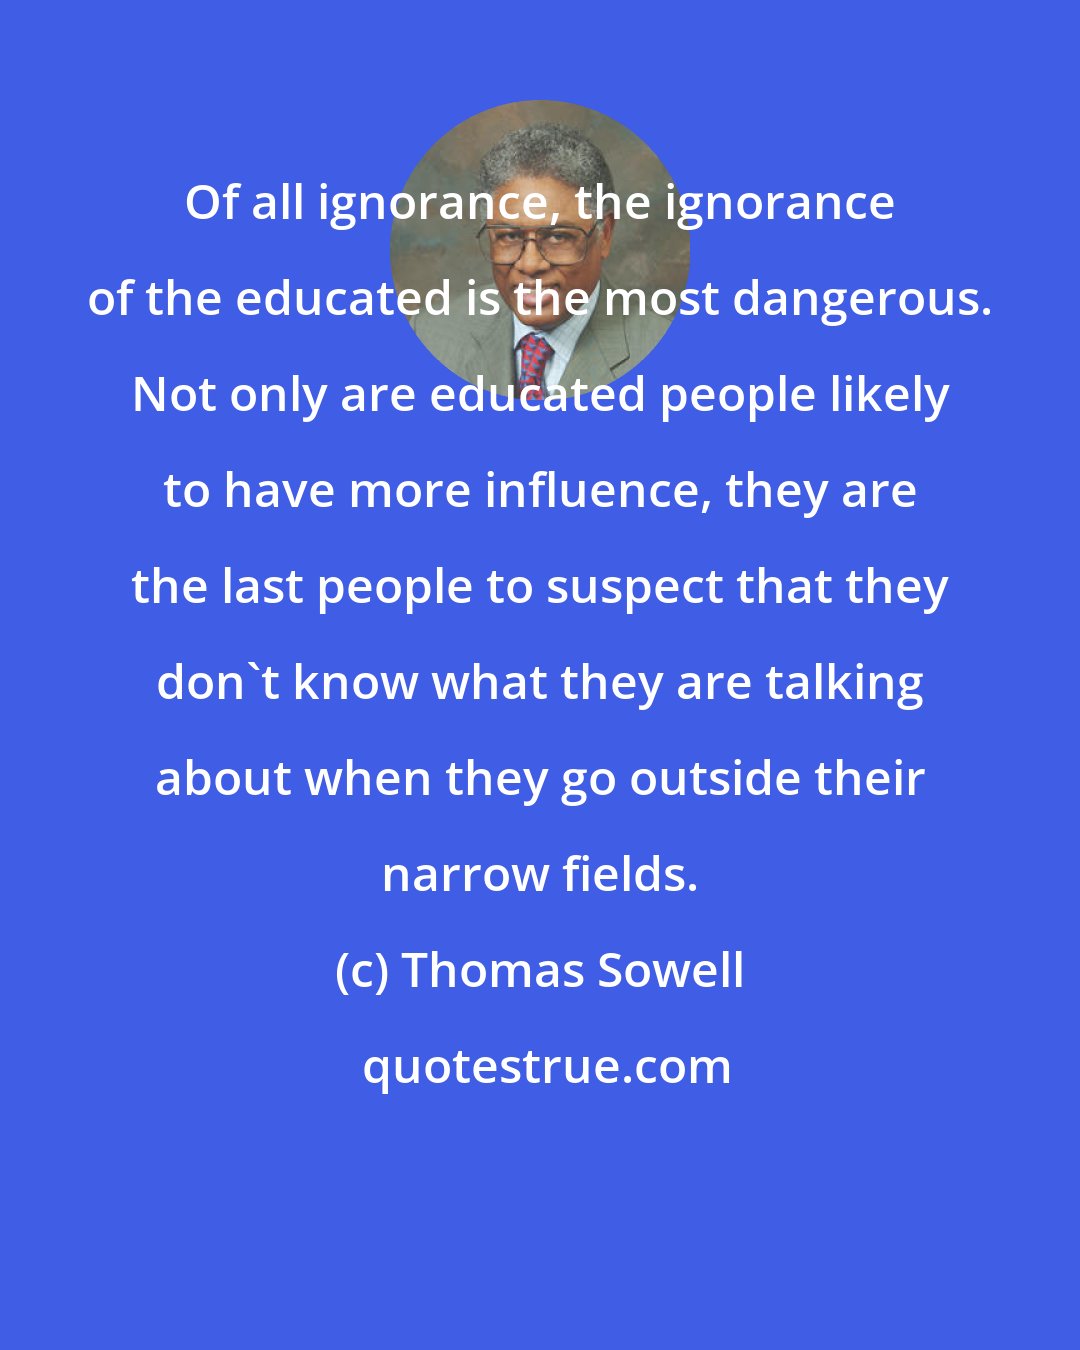 Thomas Sowell: Of all ignorance, the ignorance of the educated is the most dangerous. Not only are educated people likely to have more influence, they are the last people to suspect that they don't know what they are talking about when they go outside their narrow fields.